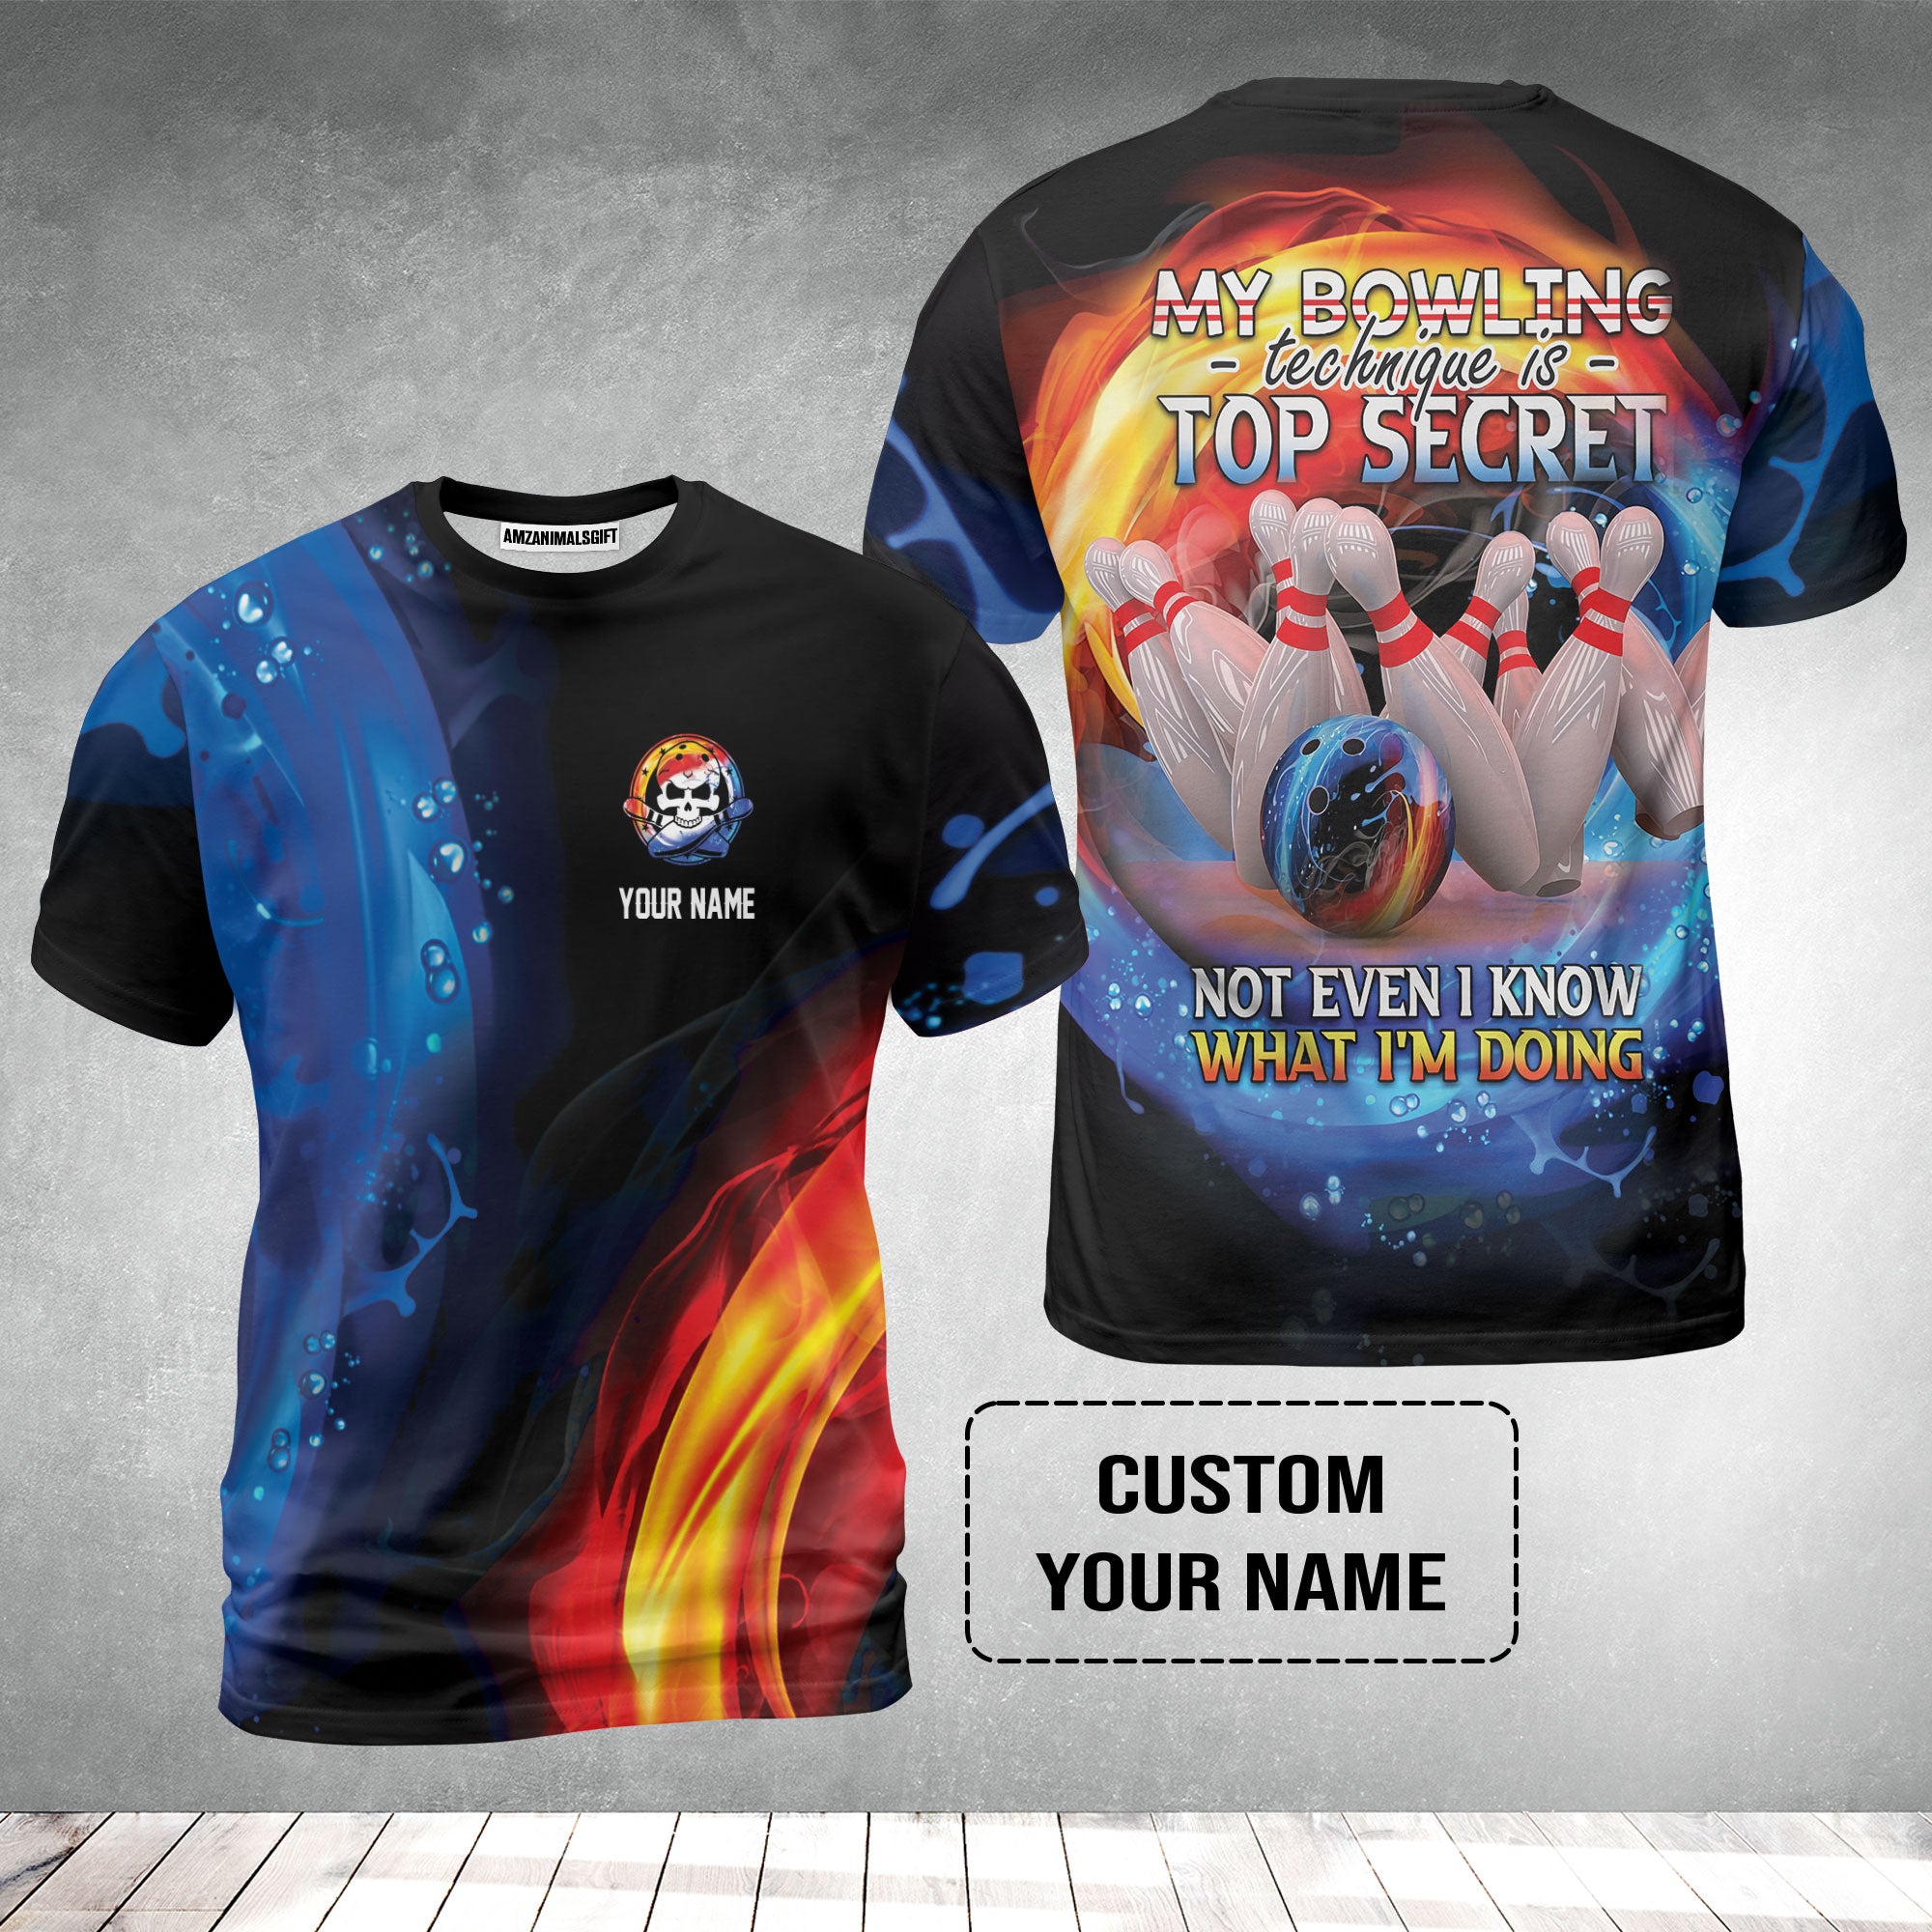 Customized Name Bowling T-Shirt, My Bowling Technique is Top Secret Personalized Bowling T-Shirt